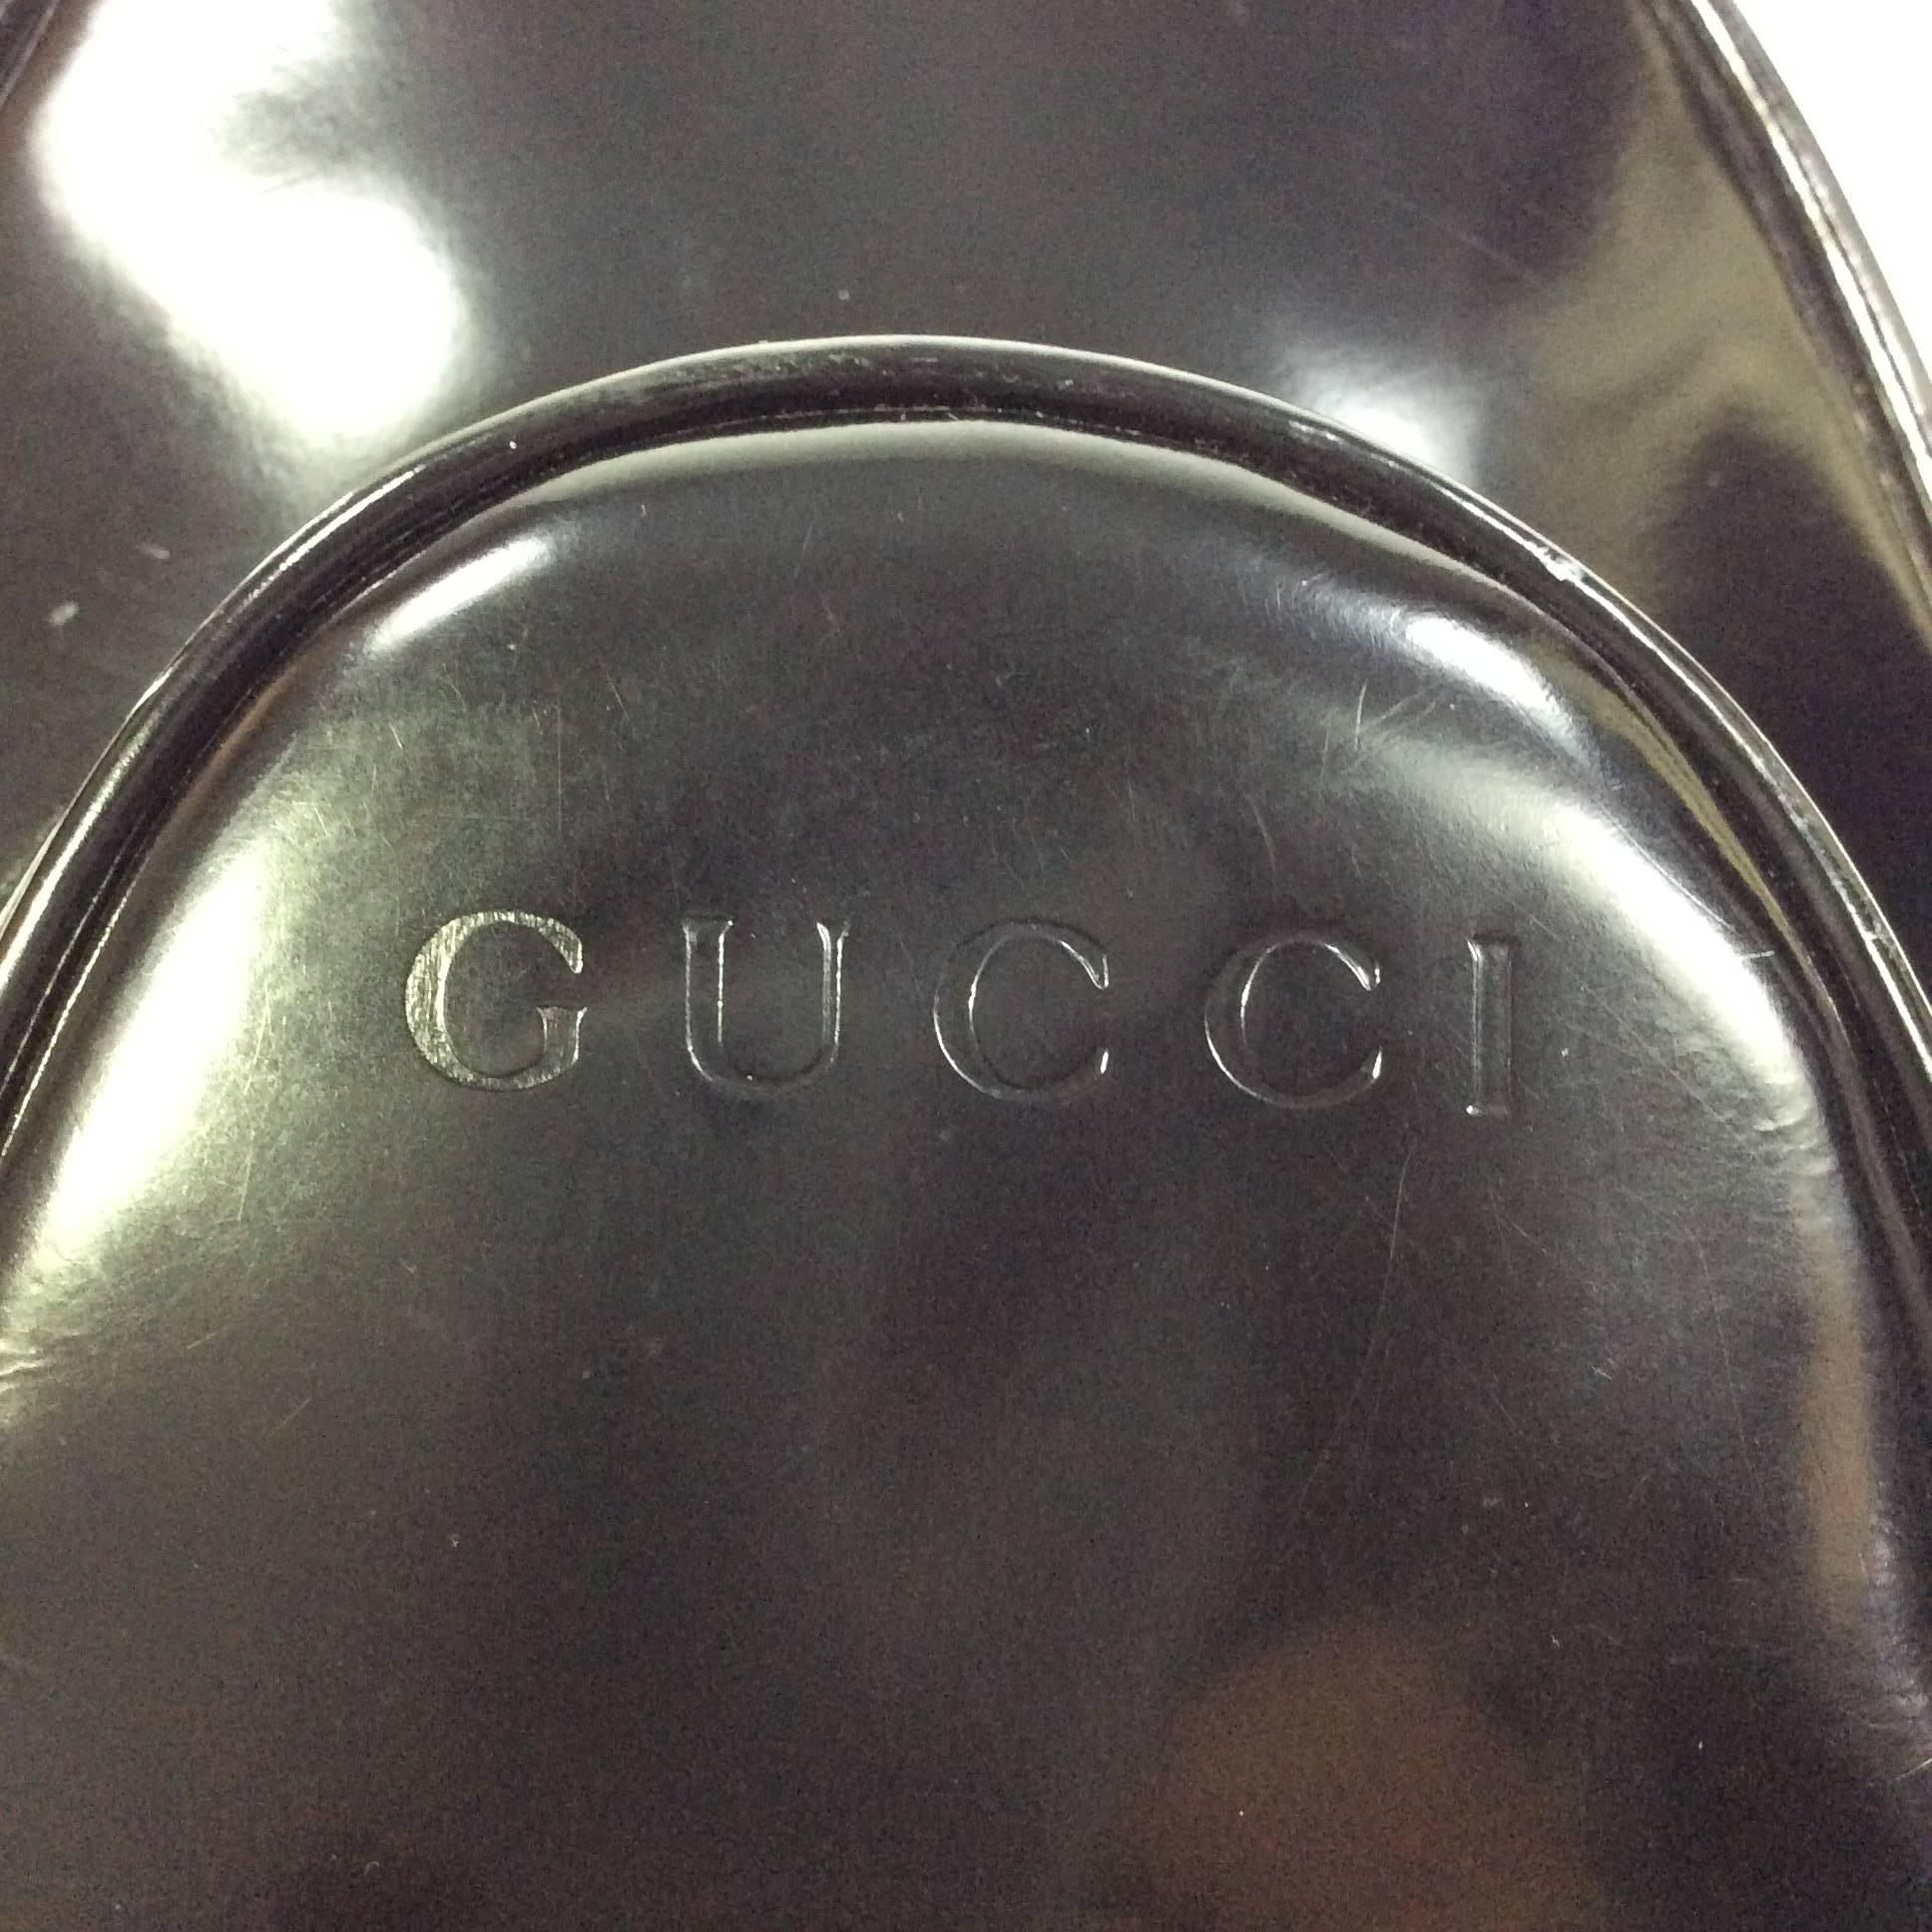 Gucci Black High Polished Leather Sling Bag In Excellent Condition For Sale In Narberth, PA